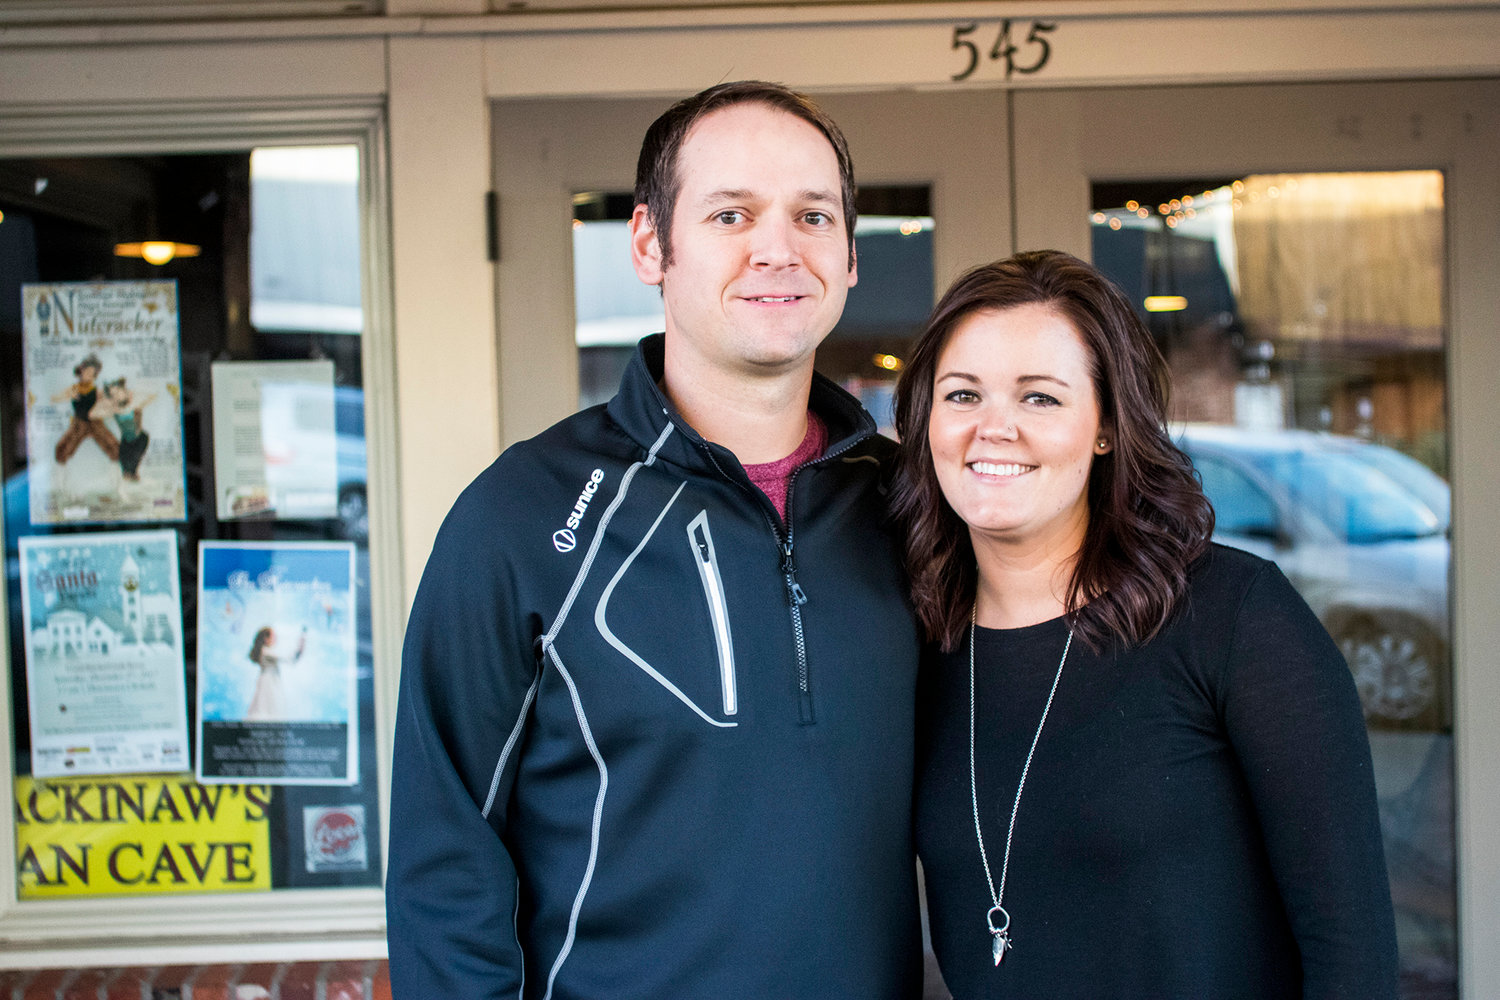 Jason Boettner, left, and his wife Shawna Boettner, right, pose for a photo Wednesday afternoon in downtown Chehalis.